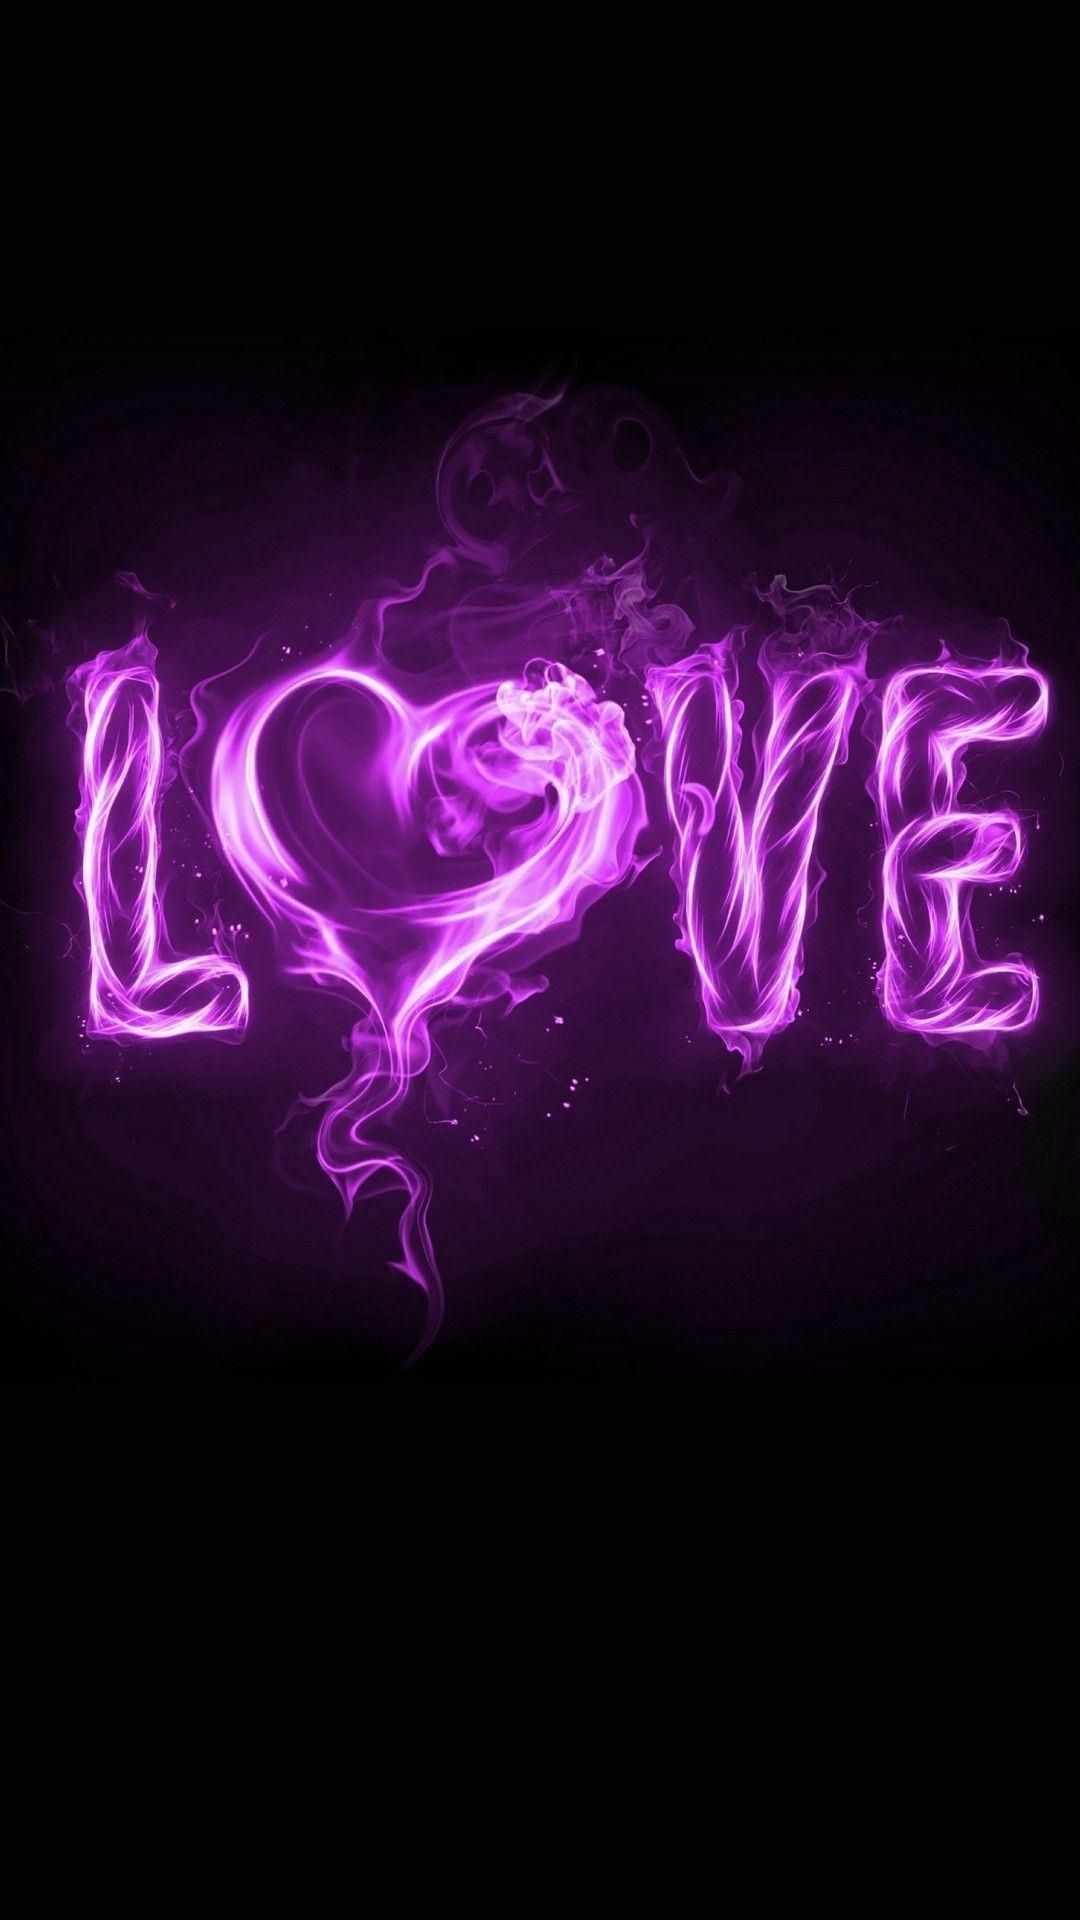 Love wallpaper for iPhone with high-resolution 1080x1920 pixel. You can use this wallpaper for your iPhone 5, 6, 7, 8, X, XS, XR backgrounds, Mobile Screensaver, or iPad Lock Screen - Android, violet